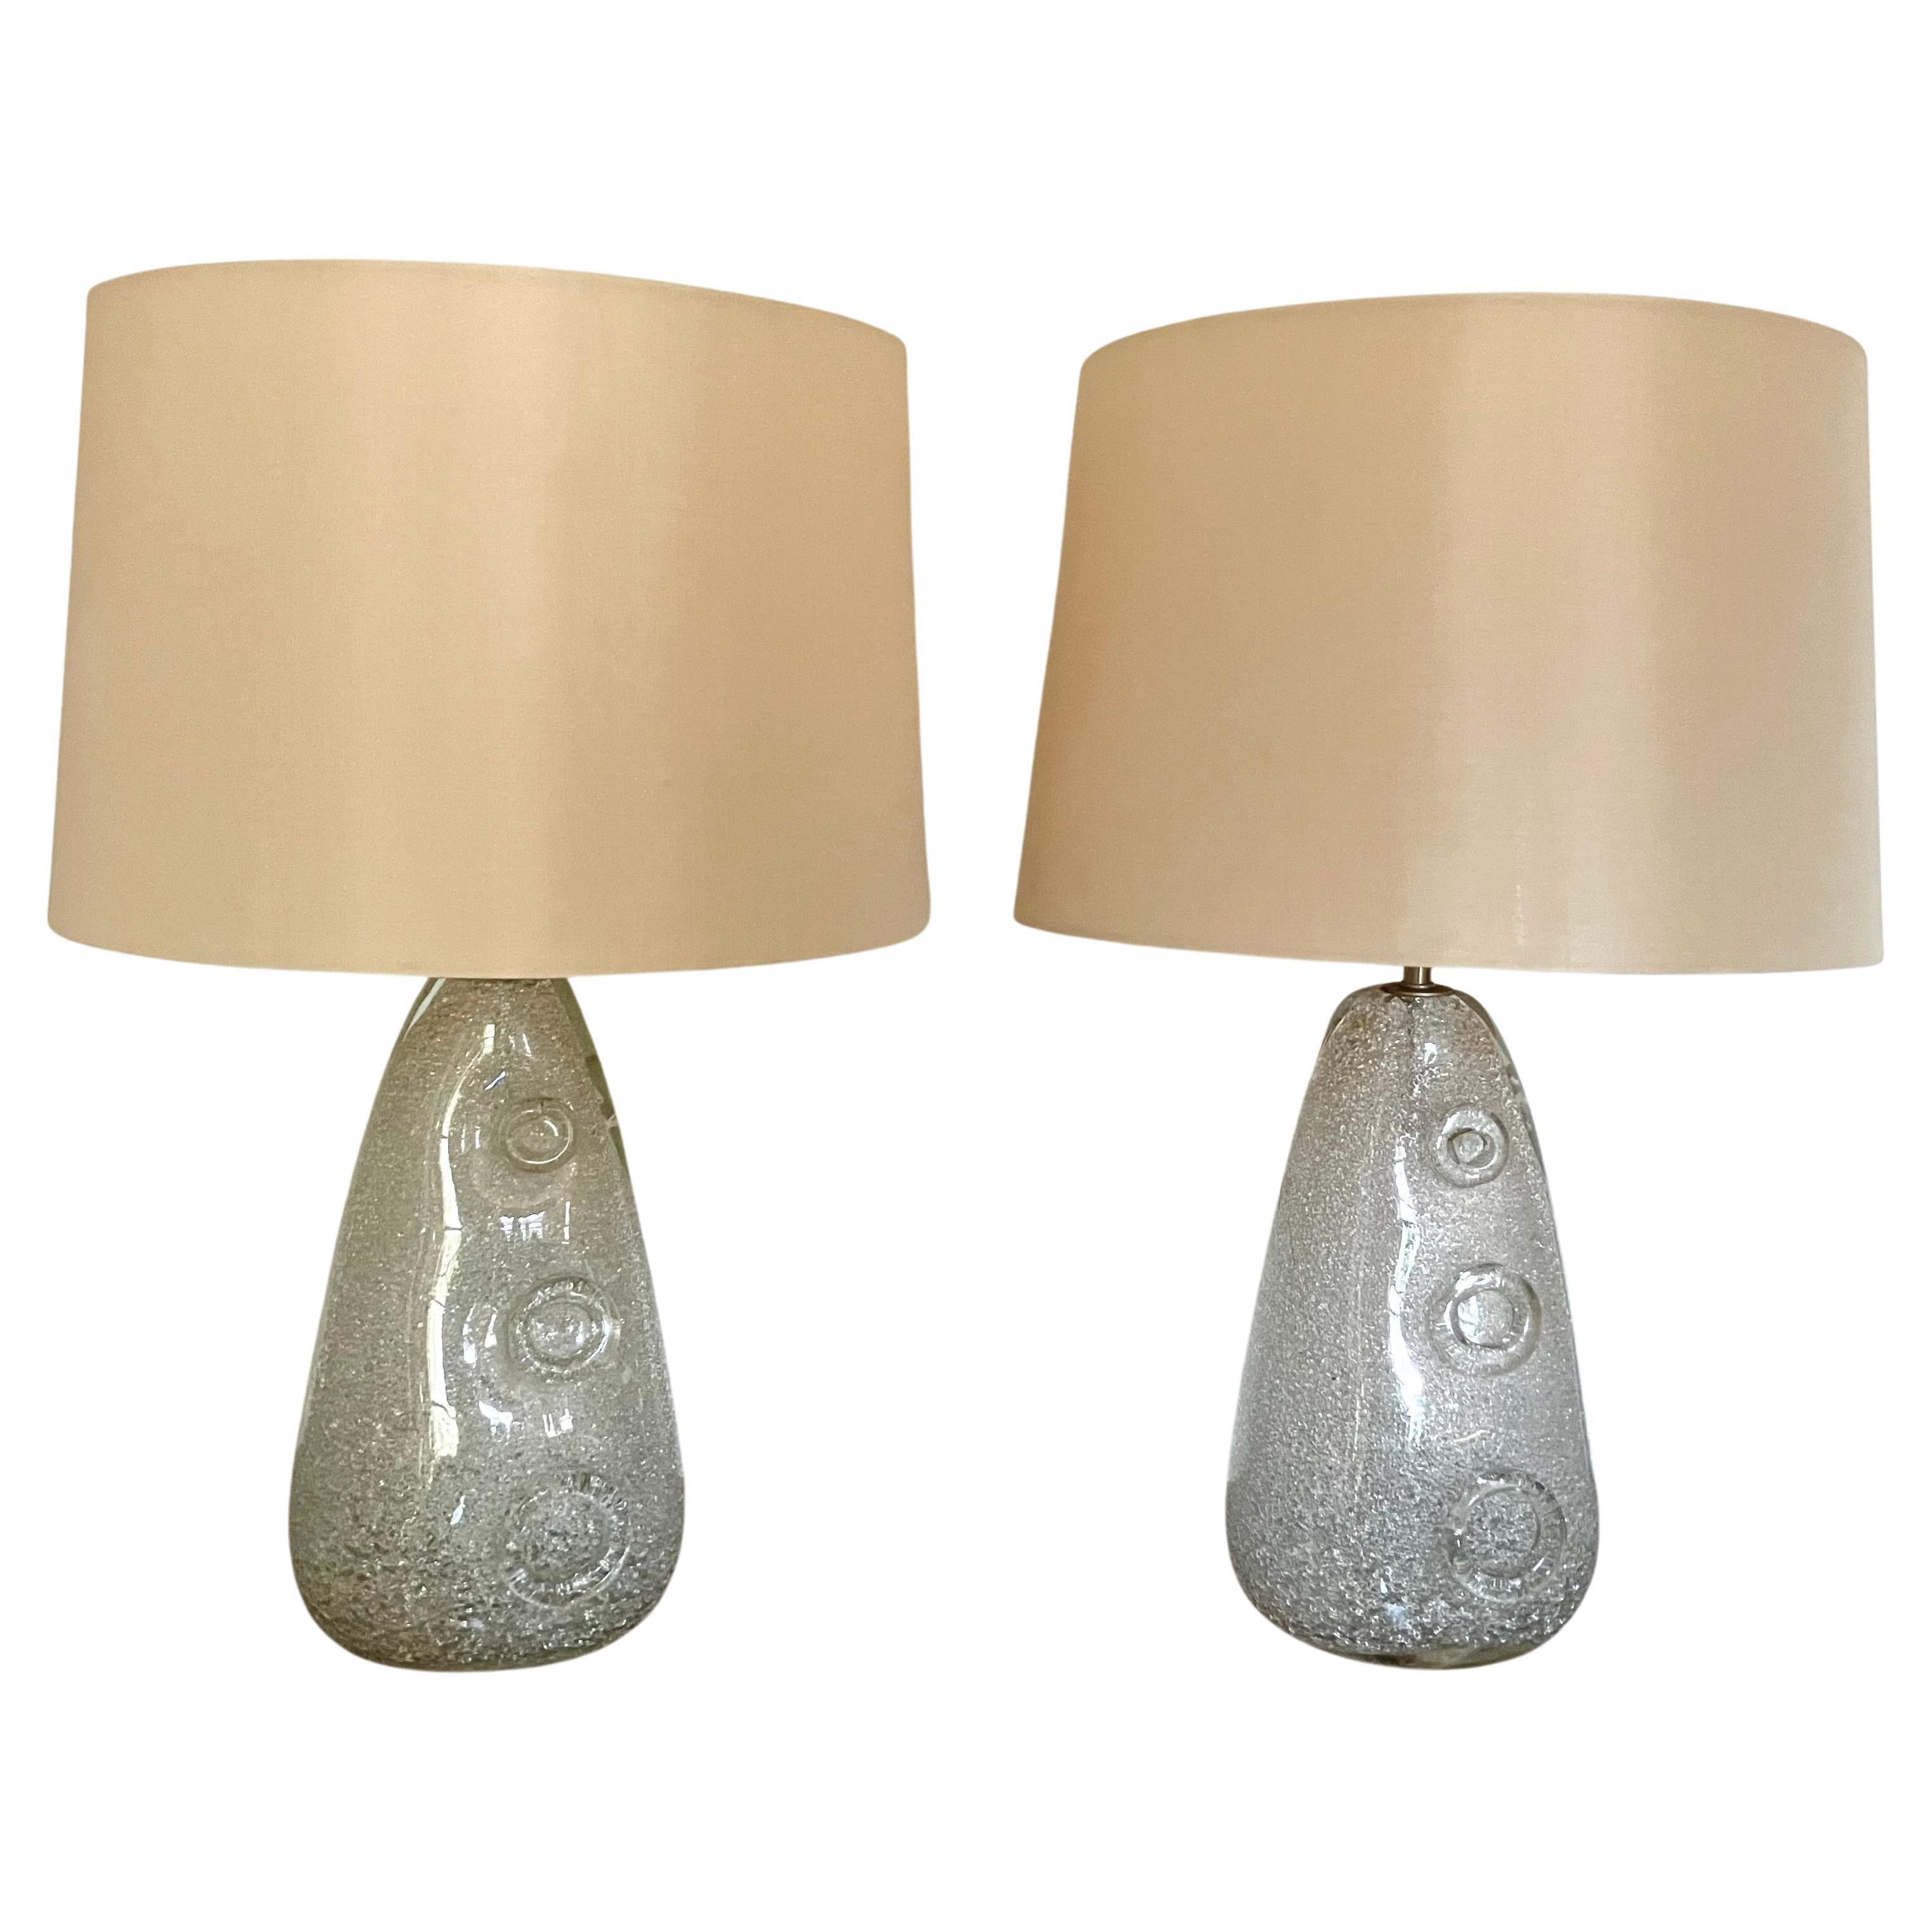 Pair Ercole Barovier Rugiada Table Lamps For Sale